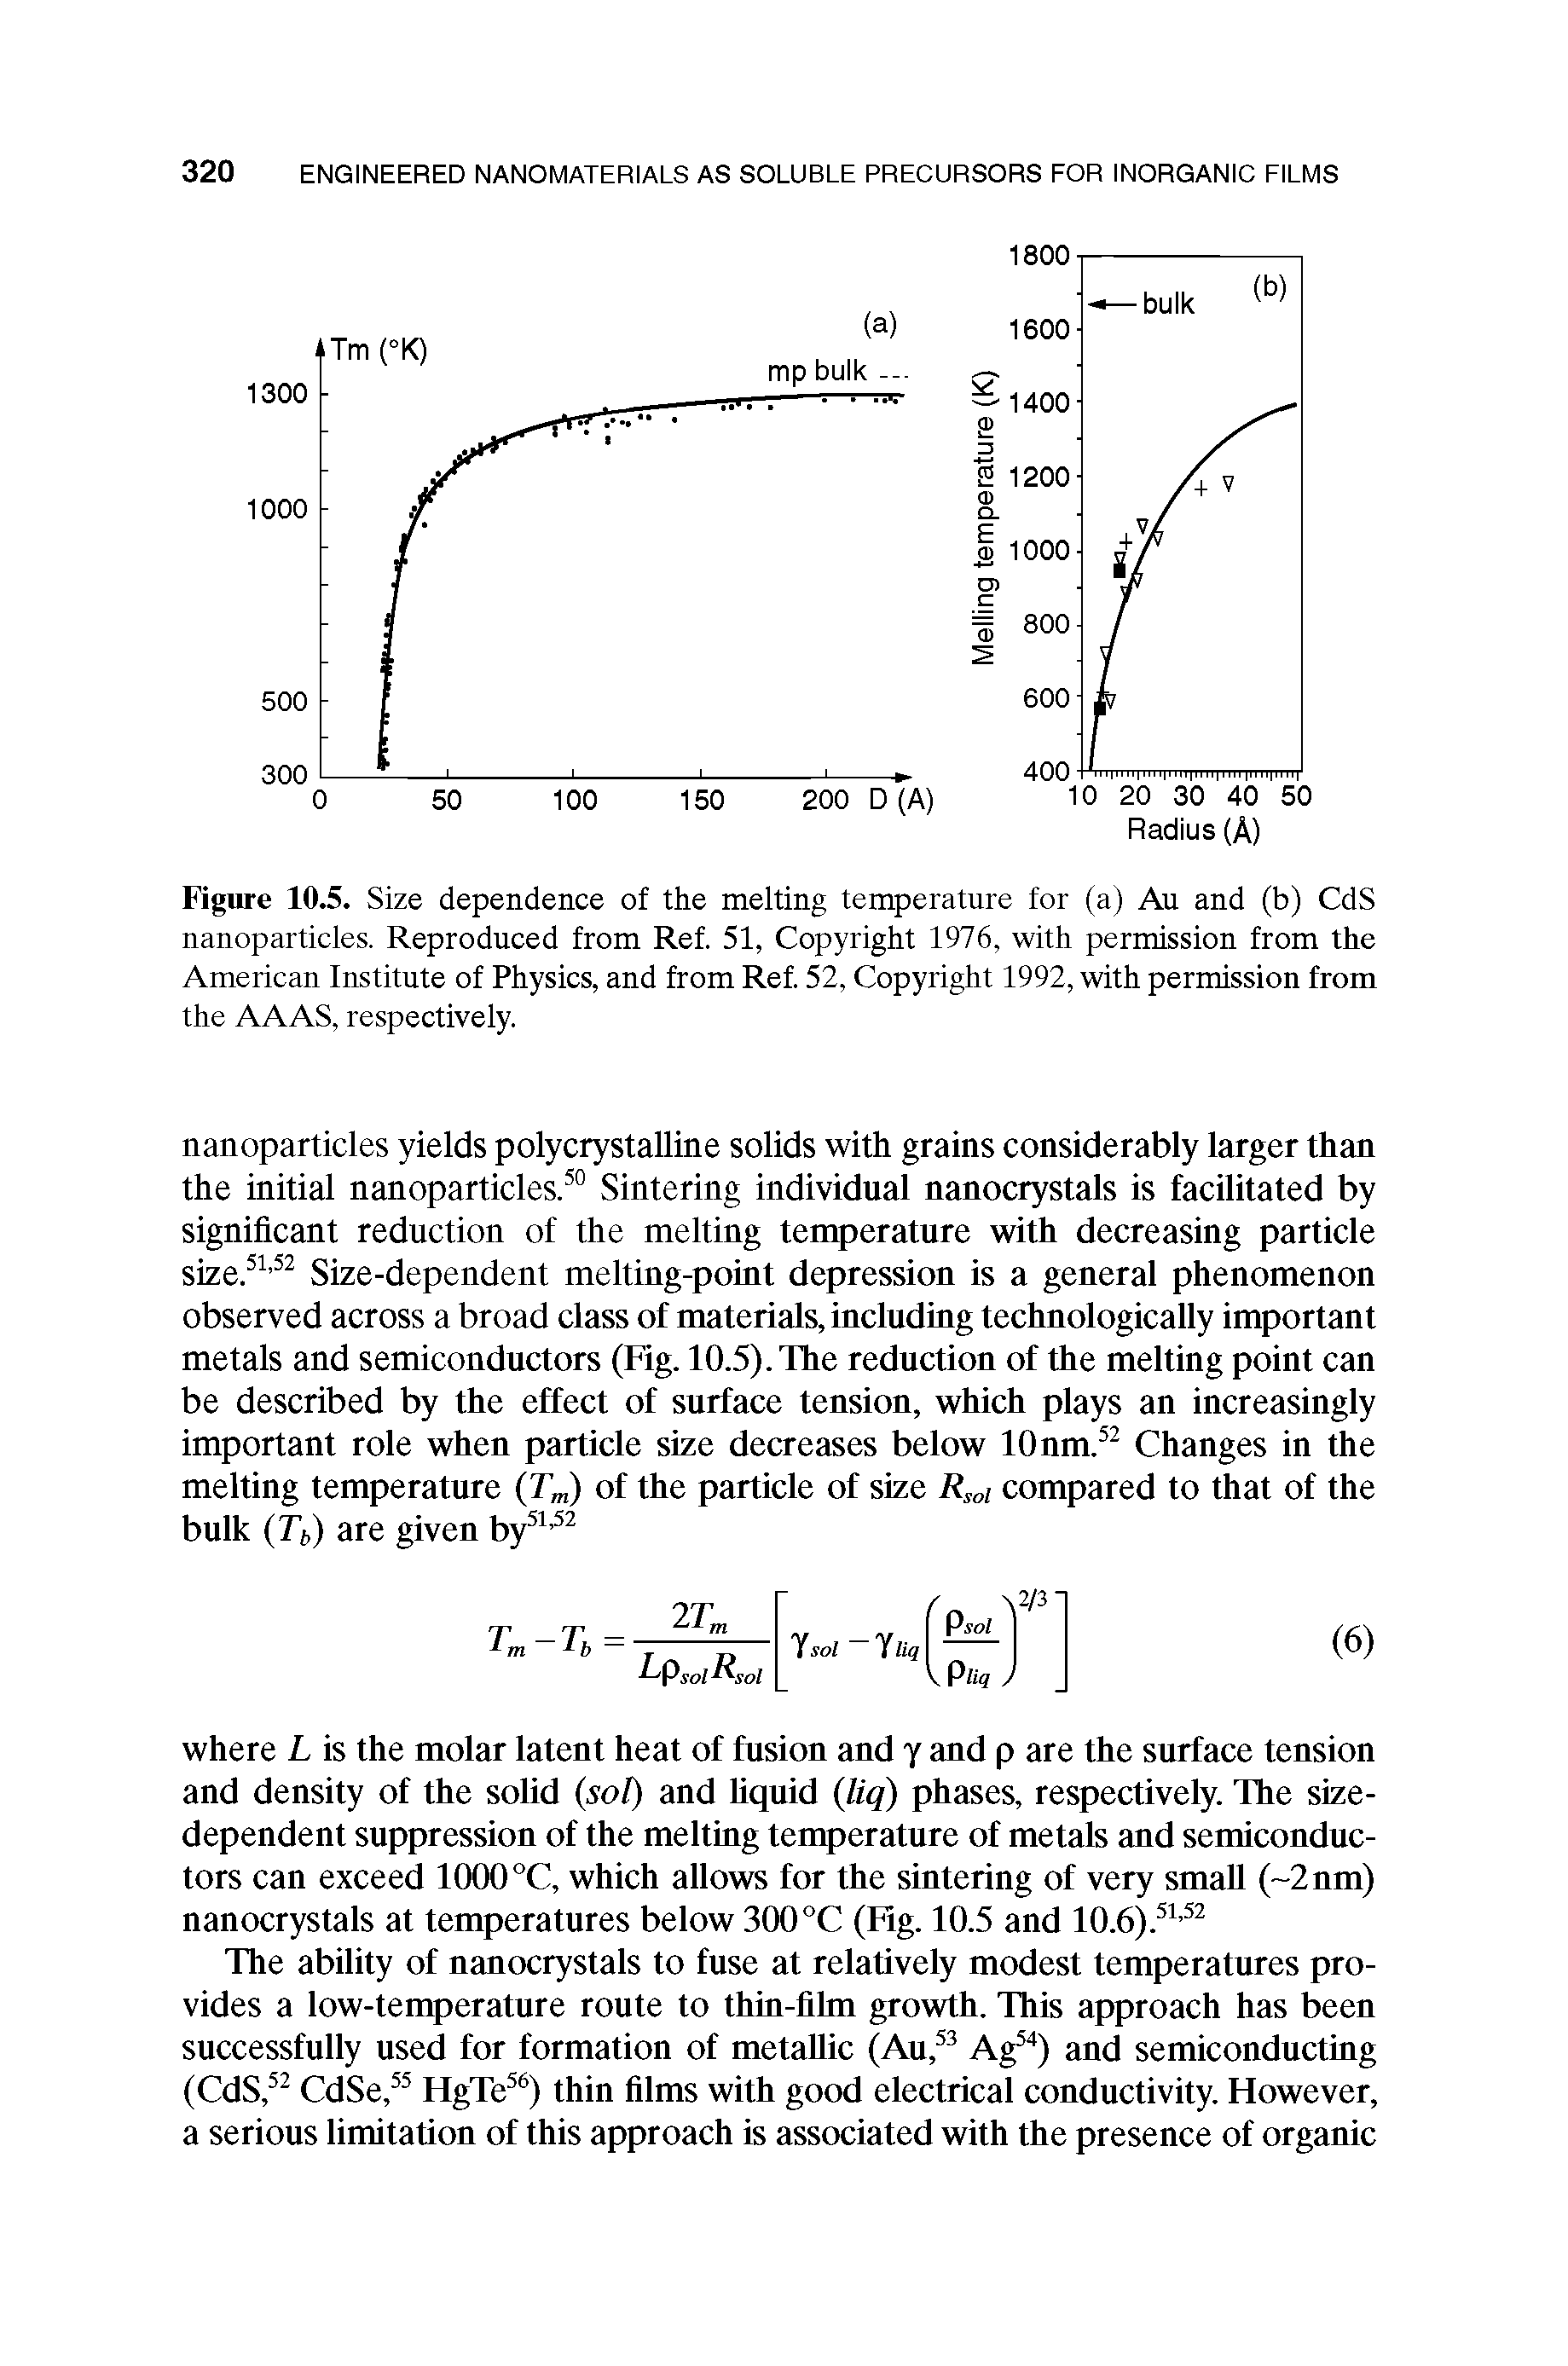 Figure 10.5. Size dependence of the melting temperature for (a) Au and (b) CdS nanoparticles. Reproduced from Ref. 51, Copyright 1976, with permission from the American Institute of Physics, and from Ref. 52, Copyright 1992, with permission from the AAAS, respectively.